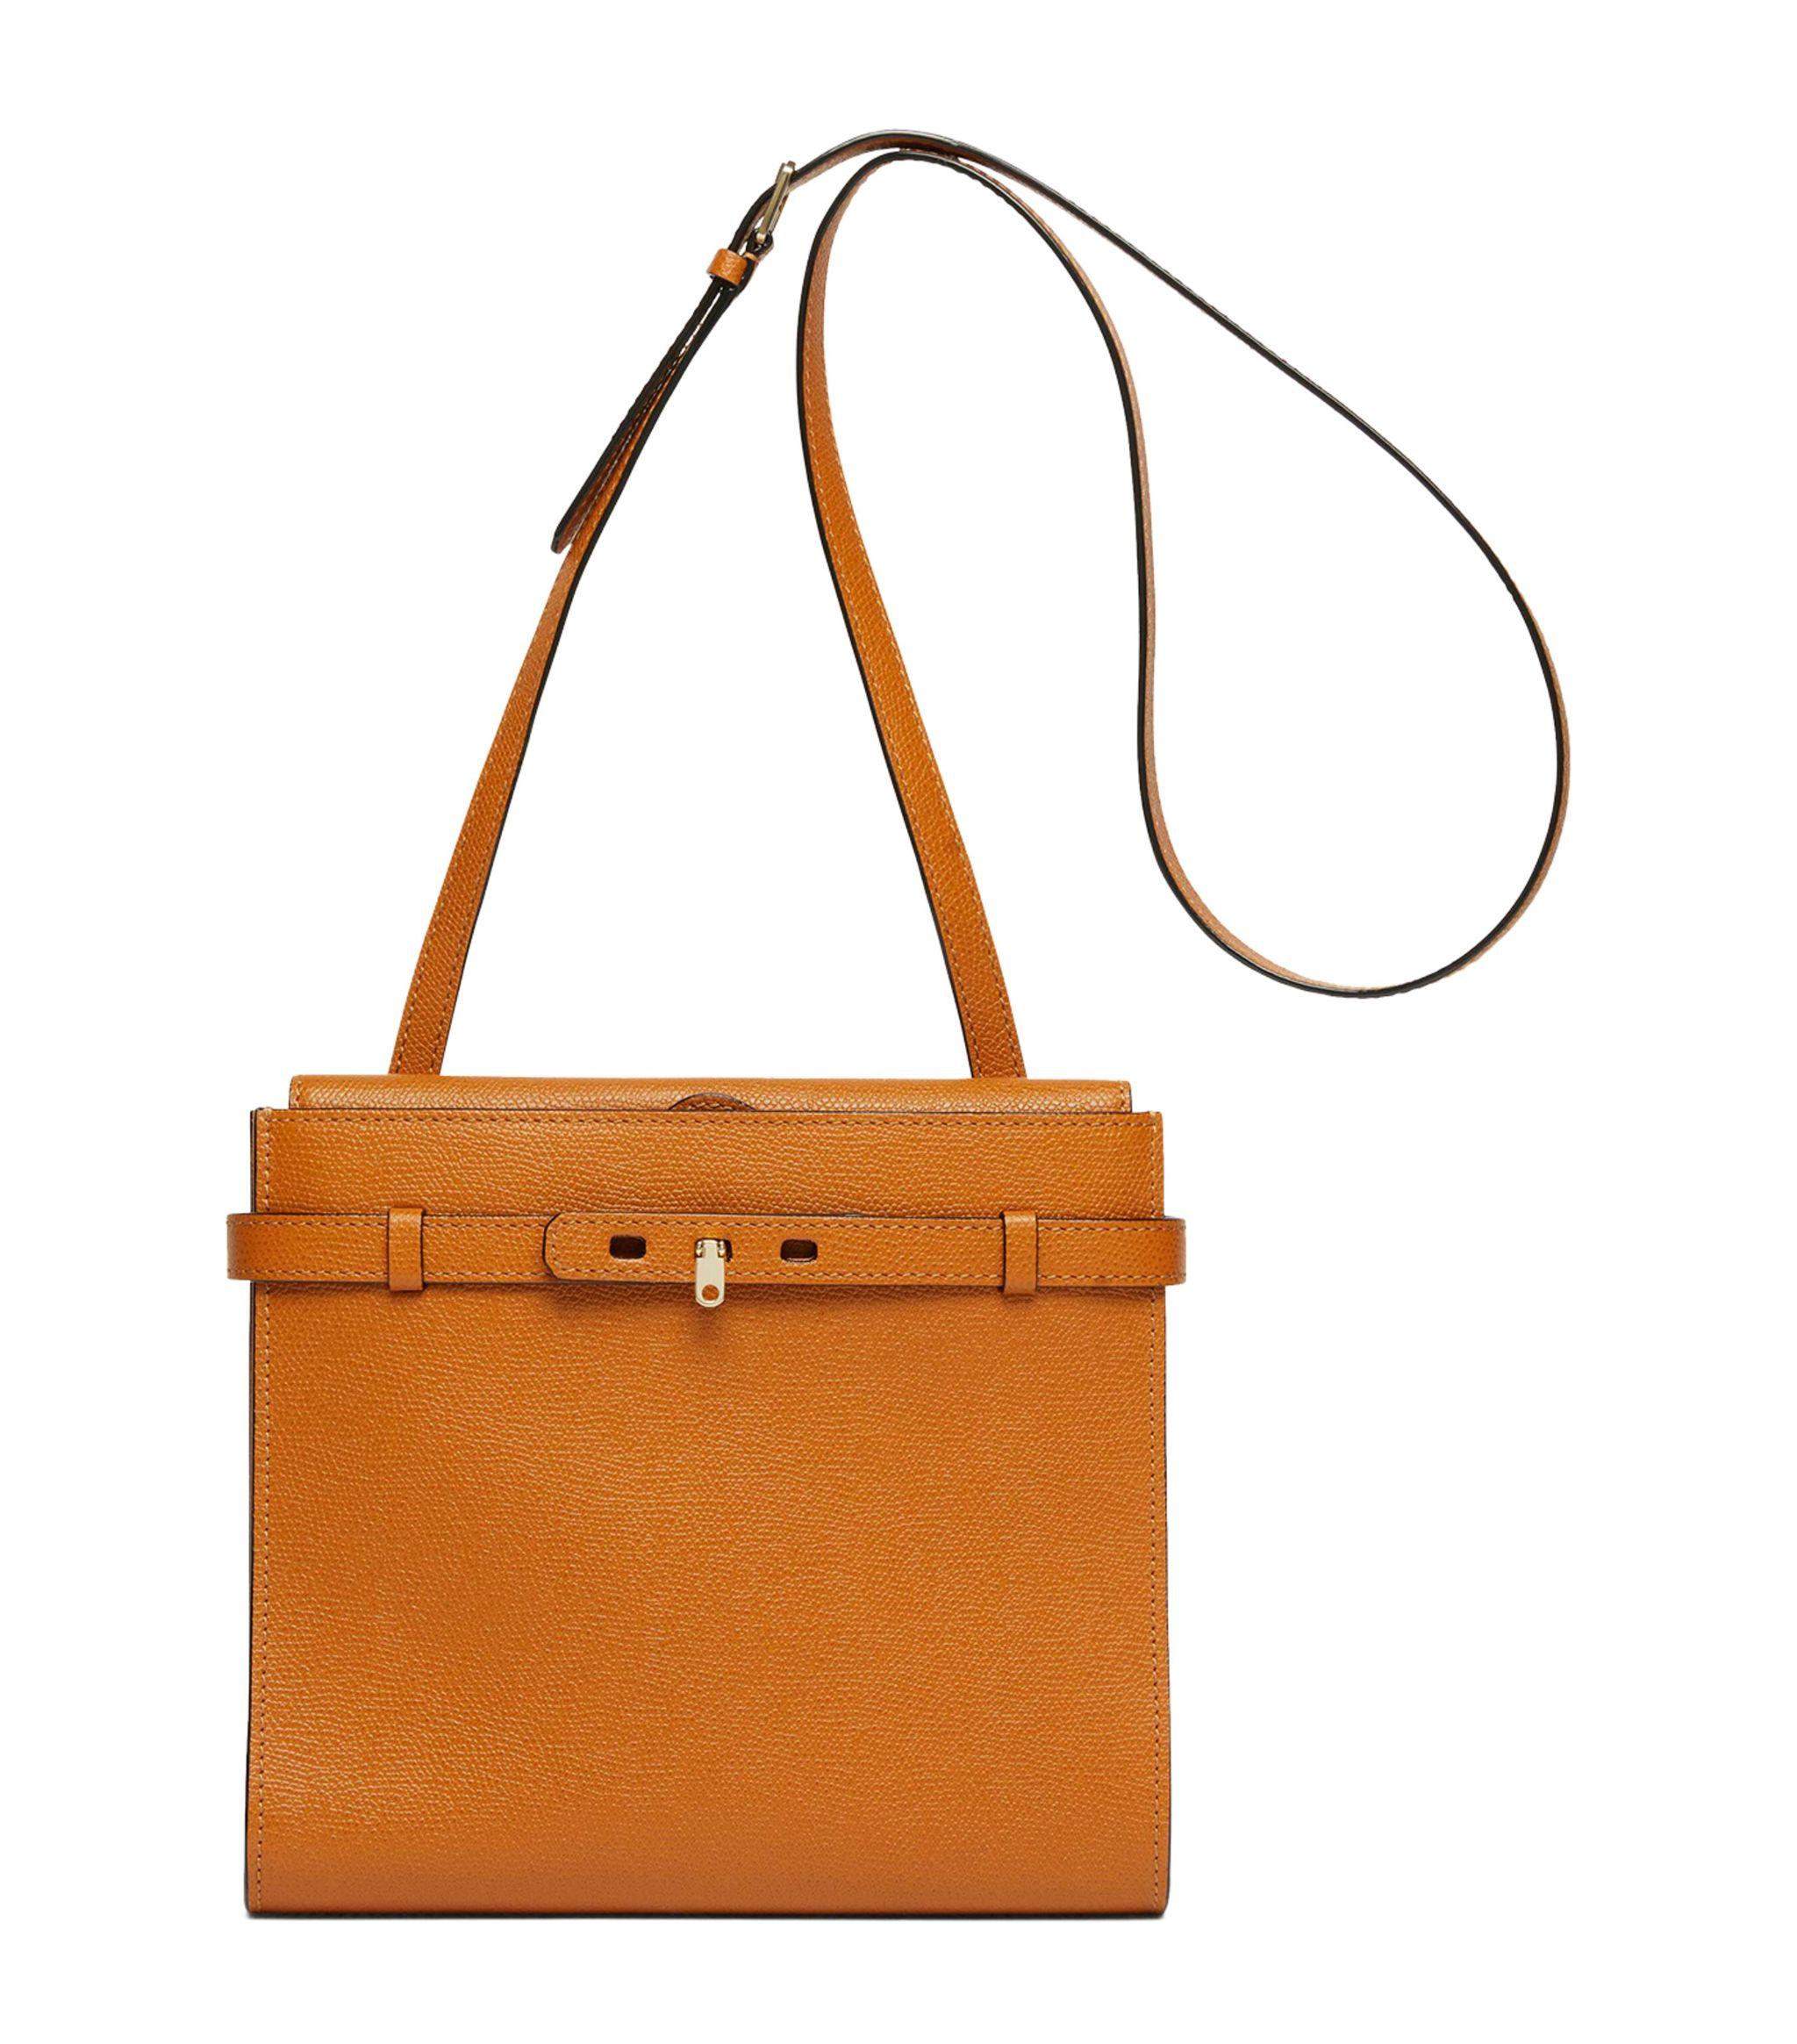 Valextra Leather Brera B-tracollina Cross-body Bag in Brown